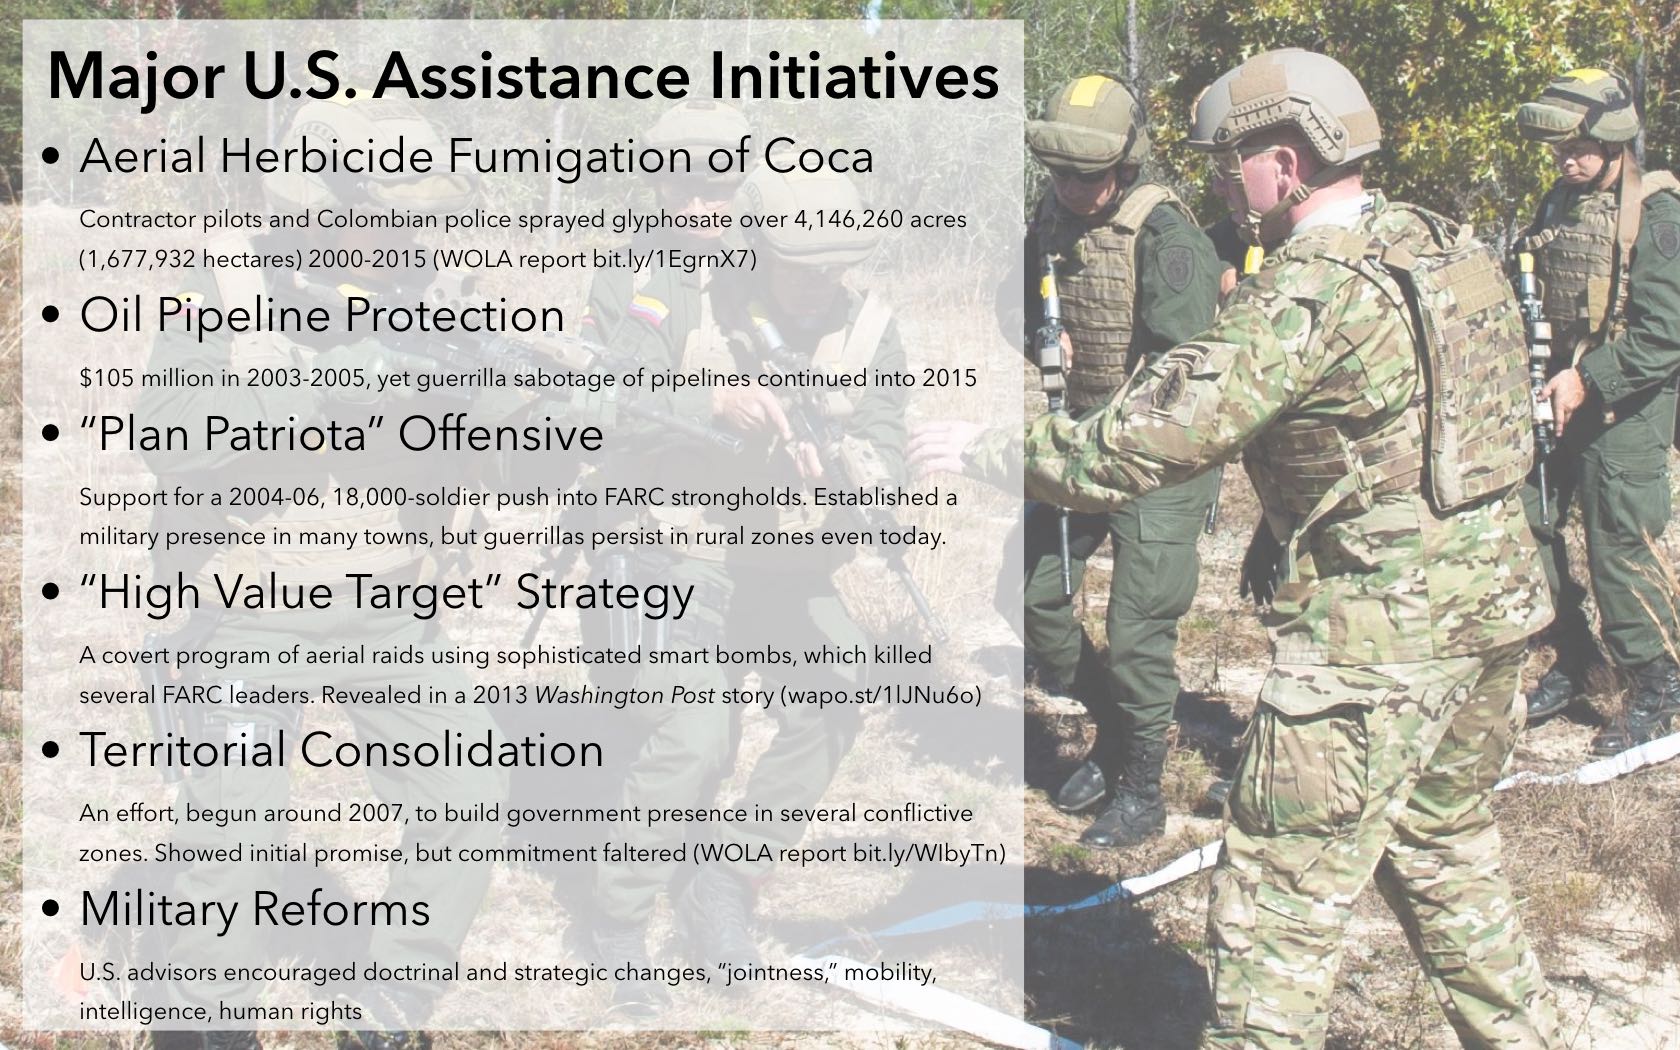 Some of the main military activities carried out with Plan Colombia funds: Aerial Herbicide Fumigation of Coca Contractor pilots and Colombian police sprayed glyphosate over 4,146,260 acres (1,677,932 hectares) 2000-2015 (WOLA report bit.ly/1EgrnX7) Oil Pipeline Protection $105 million in 2003-2005, yet guerrilla sabotage of pipelines continued into 2015 'Plan Patriota' Offensive Support for a 2004-06, 18,000-soldier push into FARC strongholds. Established a military presence in many towns, but guerrillas persist in rural zones even today. 'High Value Target' Strategy A covert program of aerial raids using sophisticated smart bombs, which killed several FARC leaders. Revealed in a 2013 Washington Post story (wapo.st/1lJNu6o) Territorial Consolidation An effort, begun around 2007, to build government presence in several conflictive zones. Showed initial promise, but commitment faltered (WOLA report bit.ly/WIbyTn) Military Reforms U.S. advisors encouraged doctrinal and strategic changes, 'jointness,' mobility, intelligence, human rights